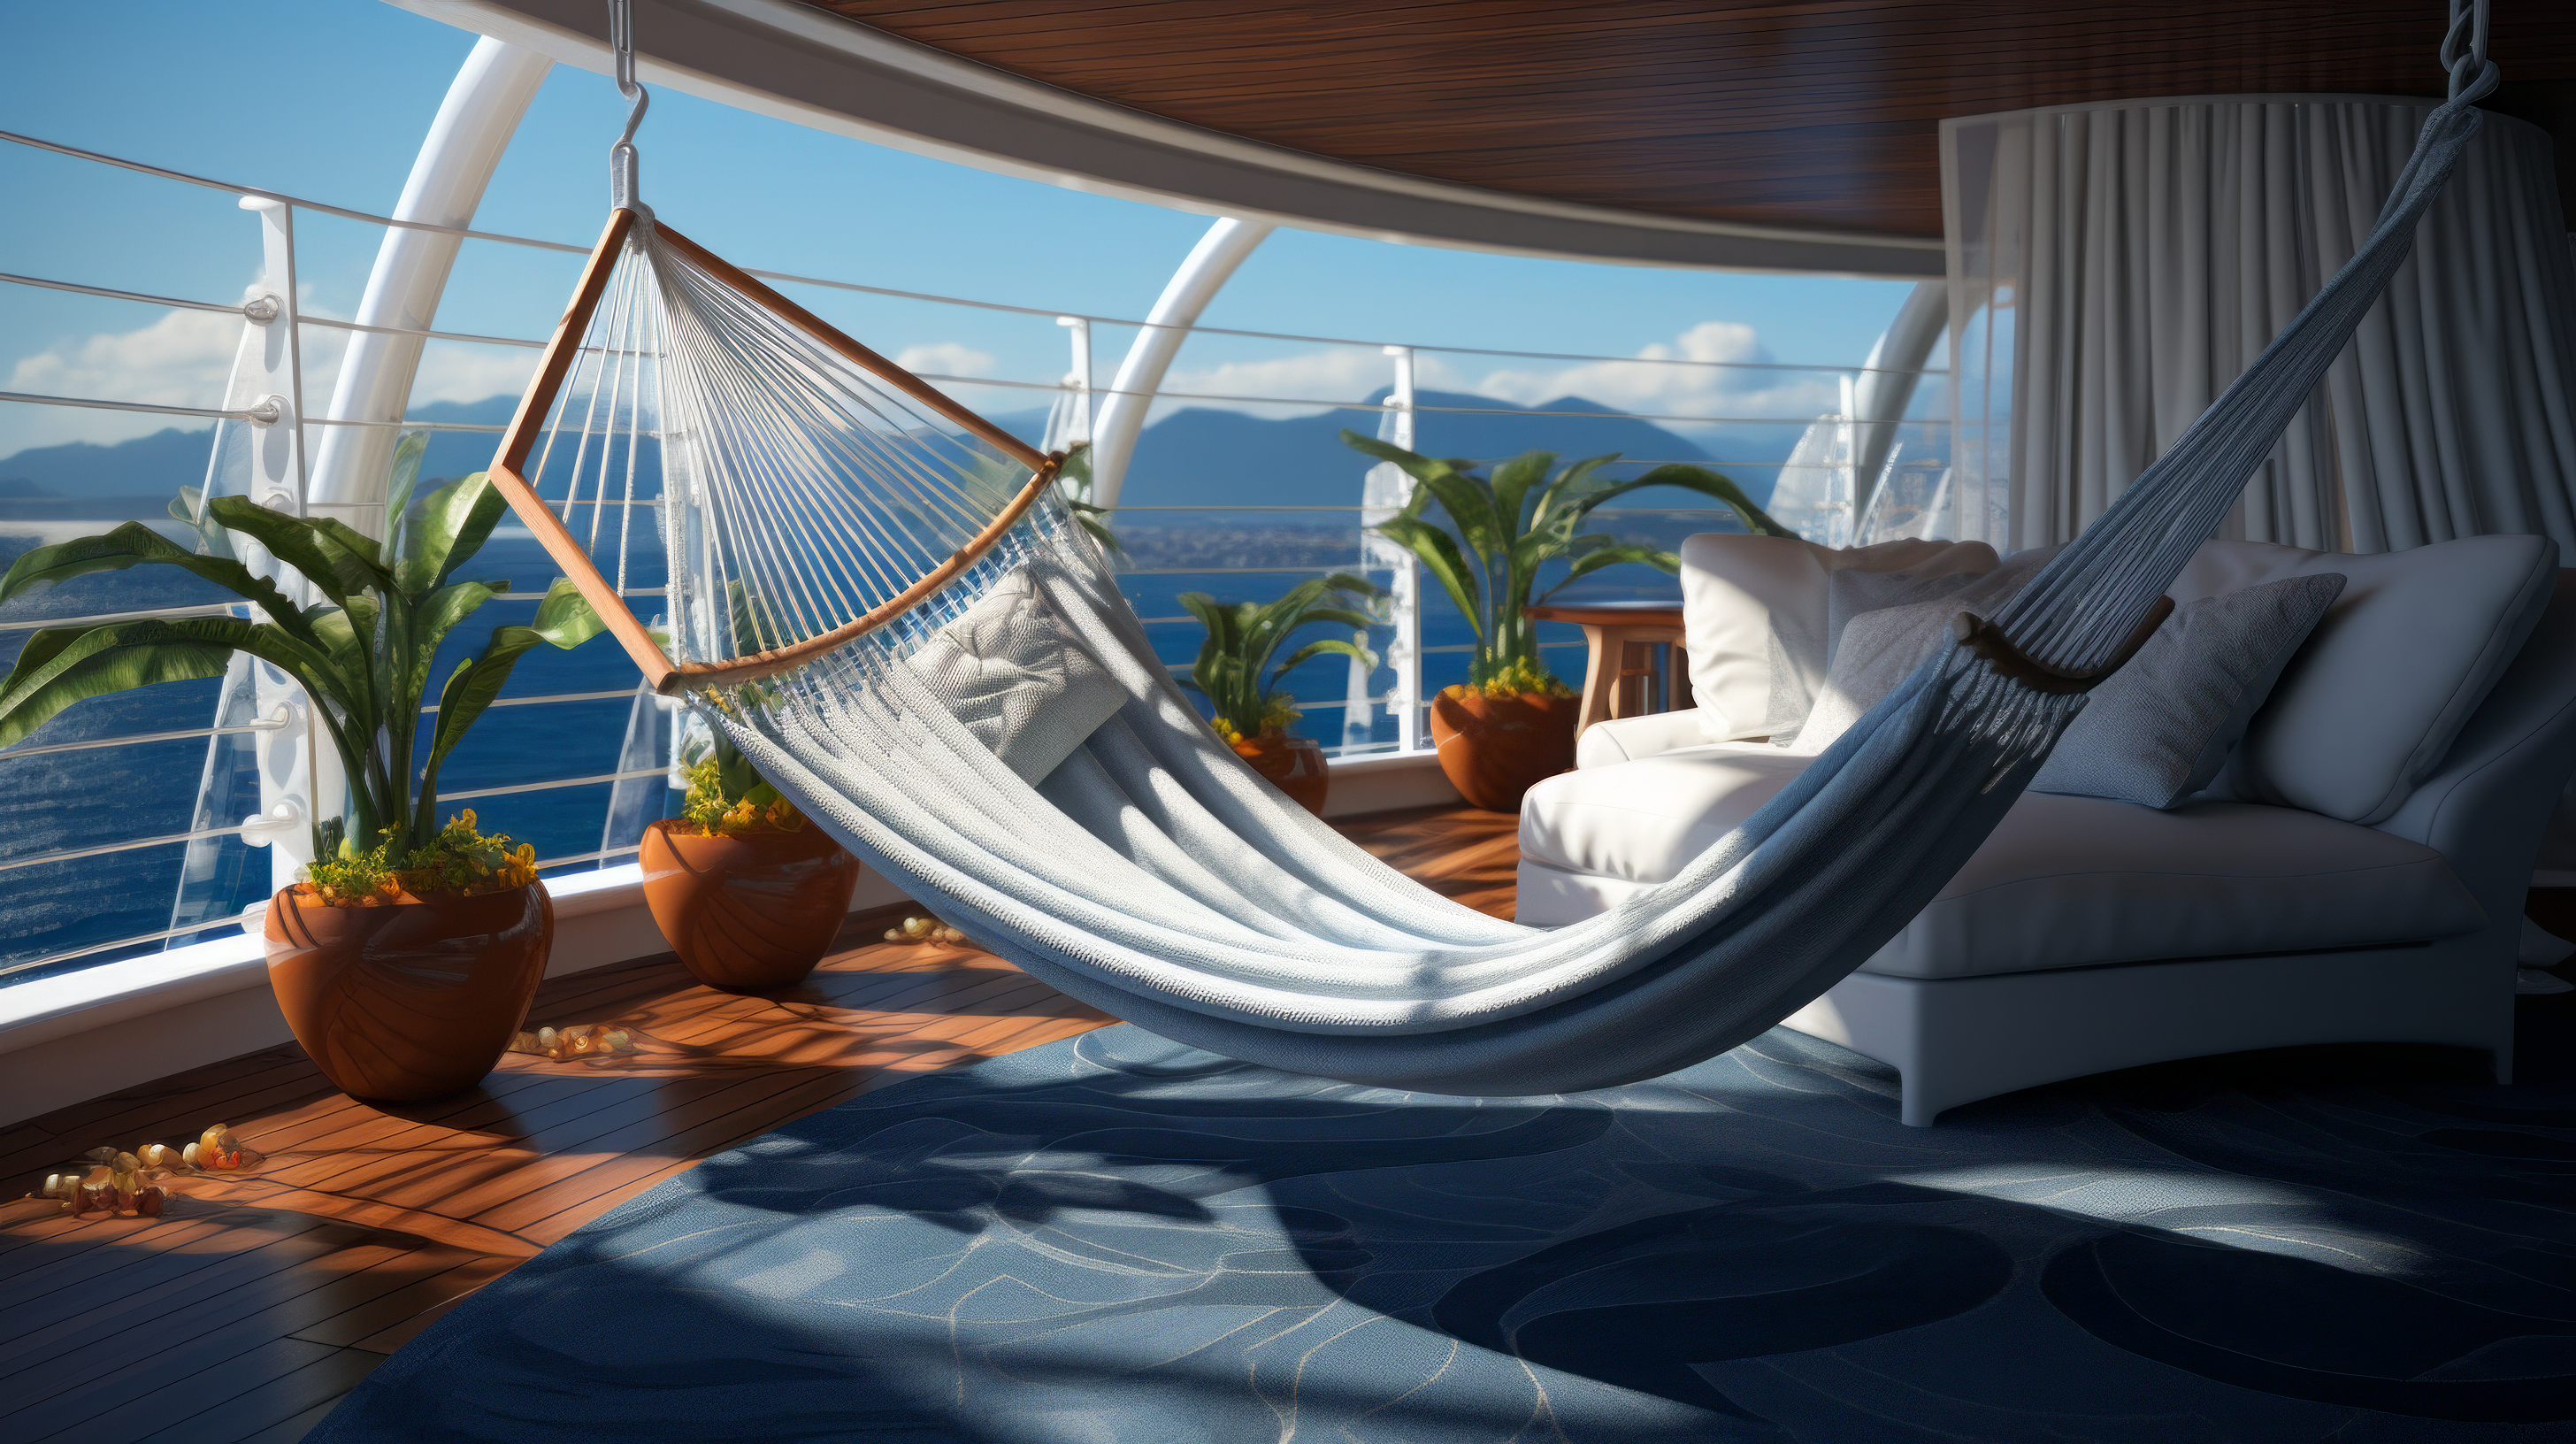 HD wallpaper of a serene balcony setting with a hammock, comfortable sofa, and potted plants overlooking a mountainous view, illustrating AI-generated art.